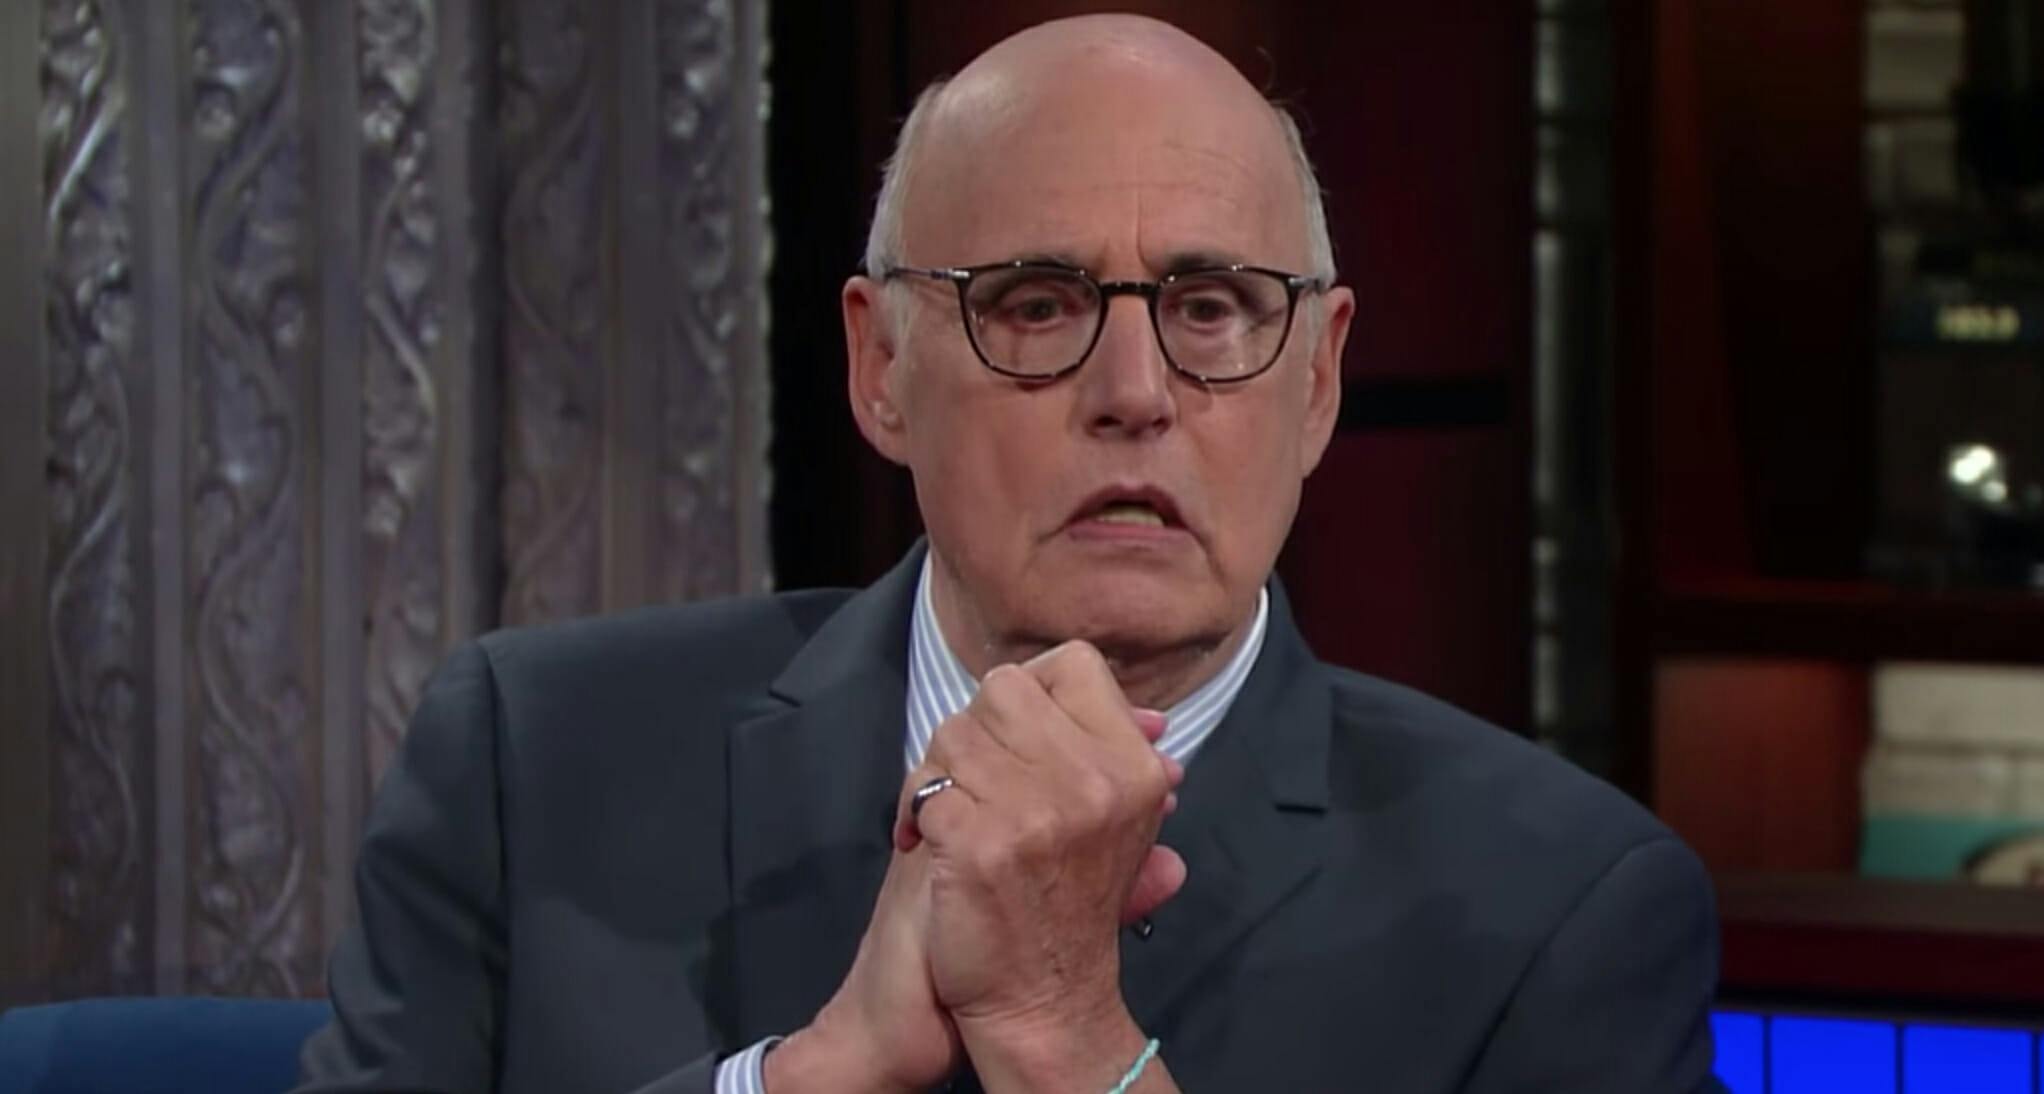 Amazon confirmed that Jeffrey Tambor will not be returning to 'Transparent' following harassment claims.